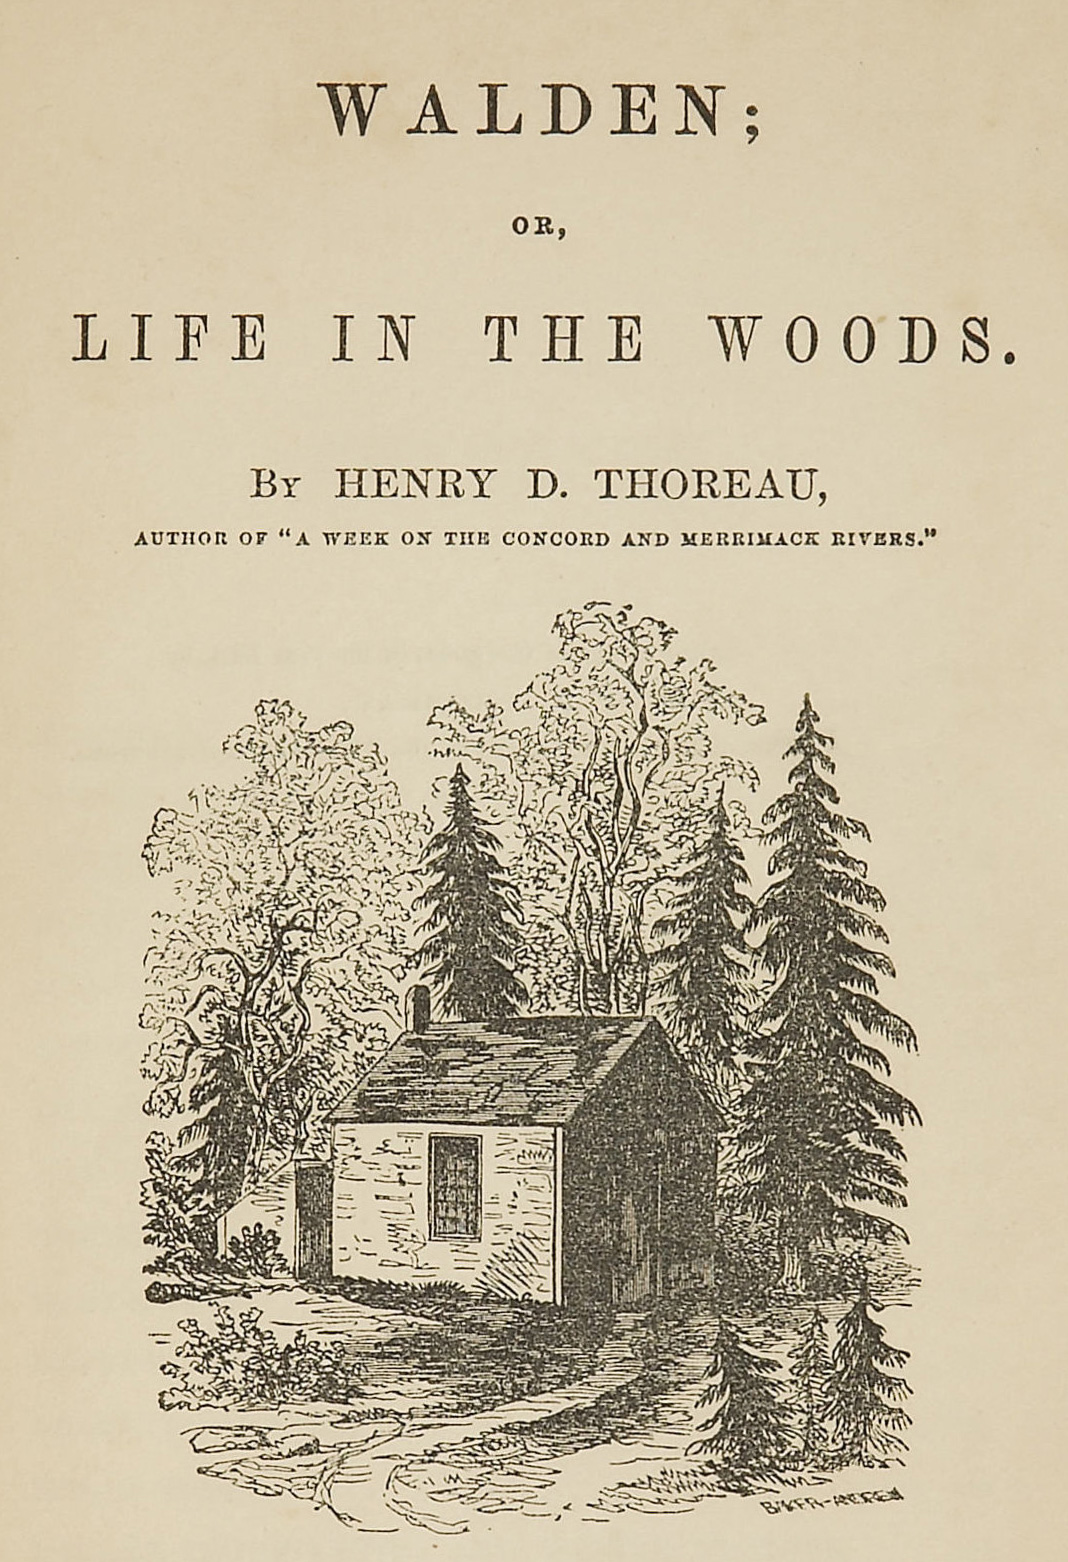 The Project Gutenberg eBook of Walden, by Henry David Thoreau photo